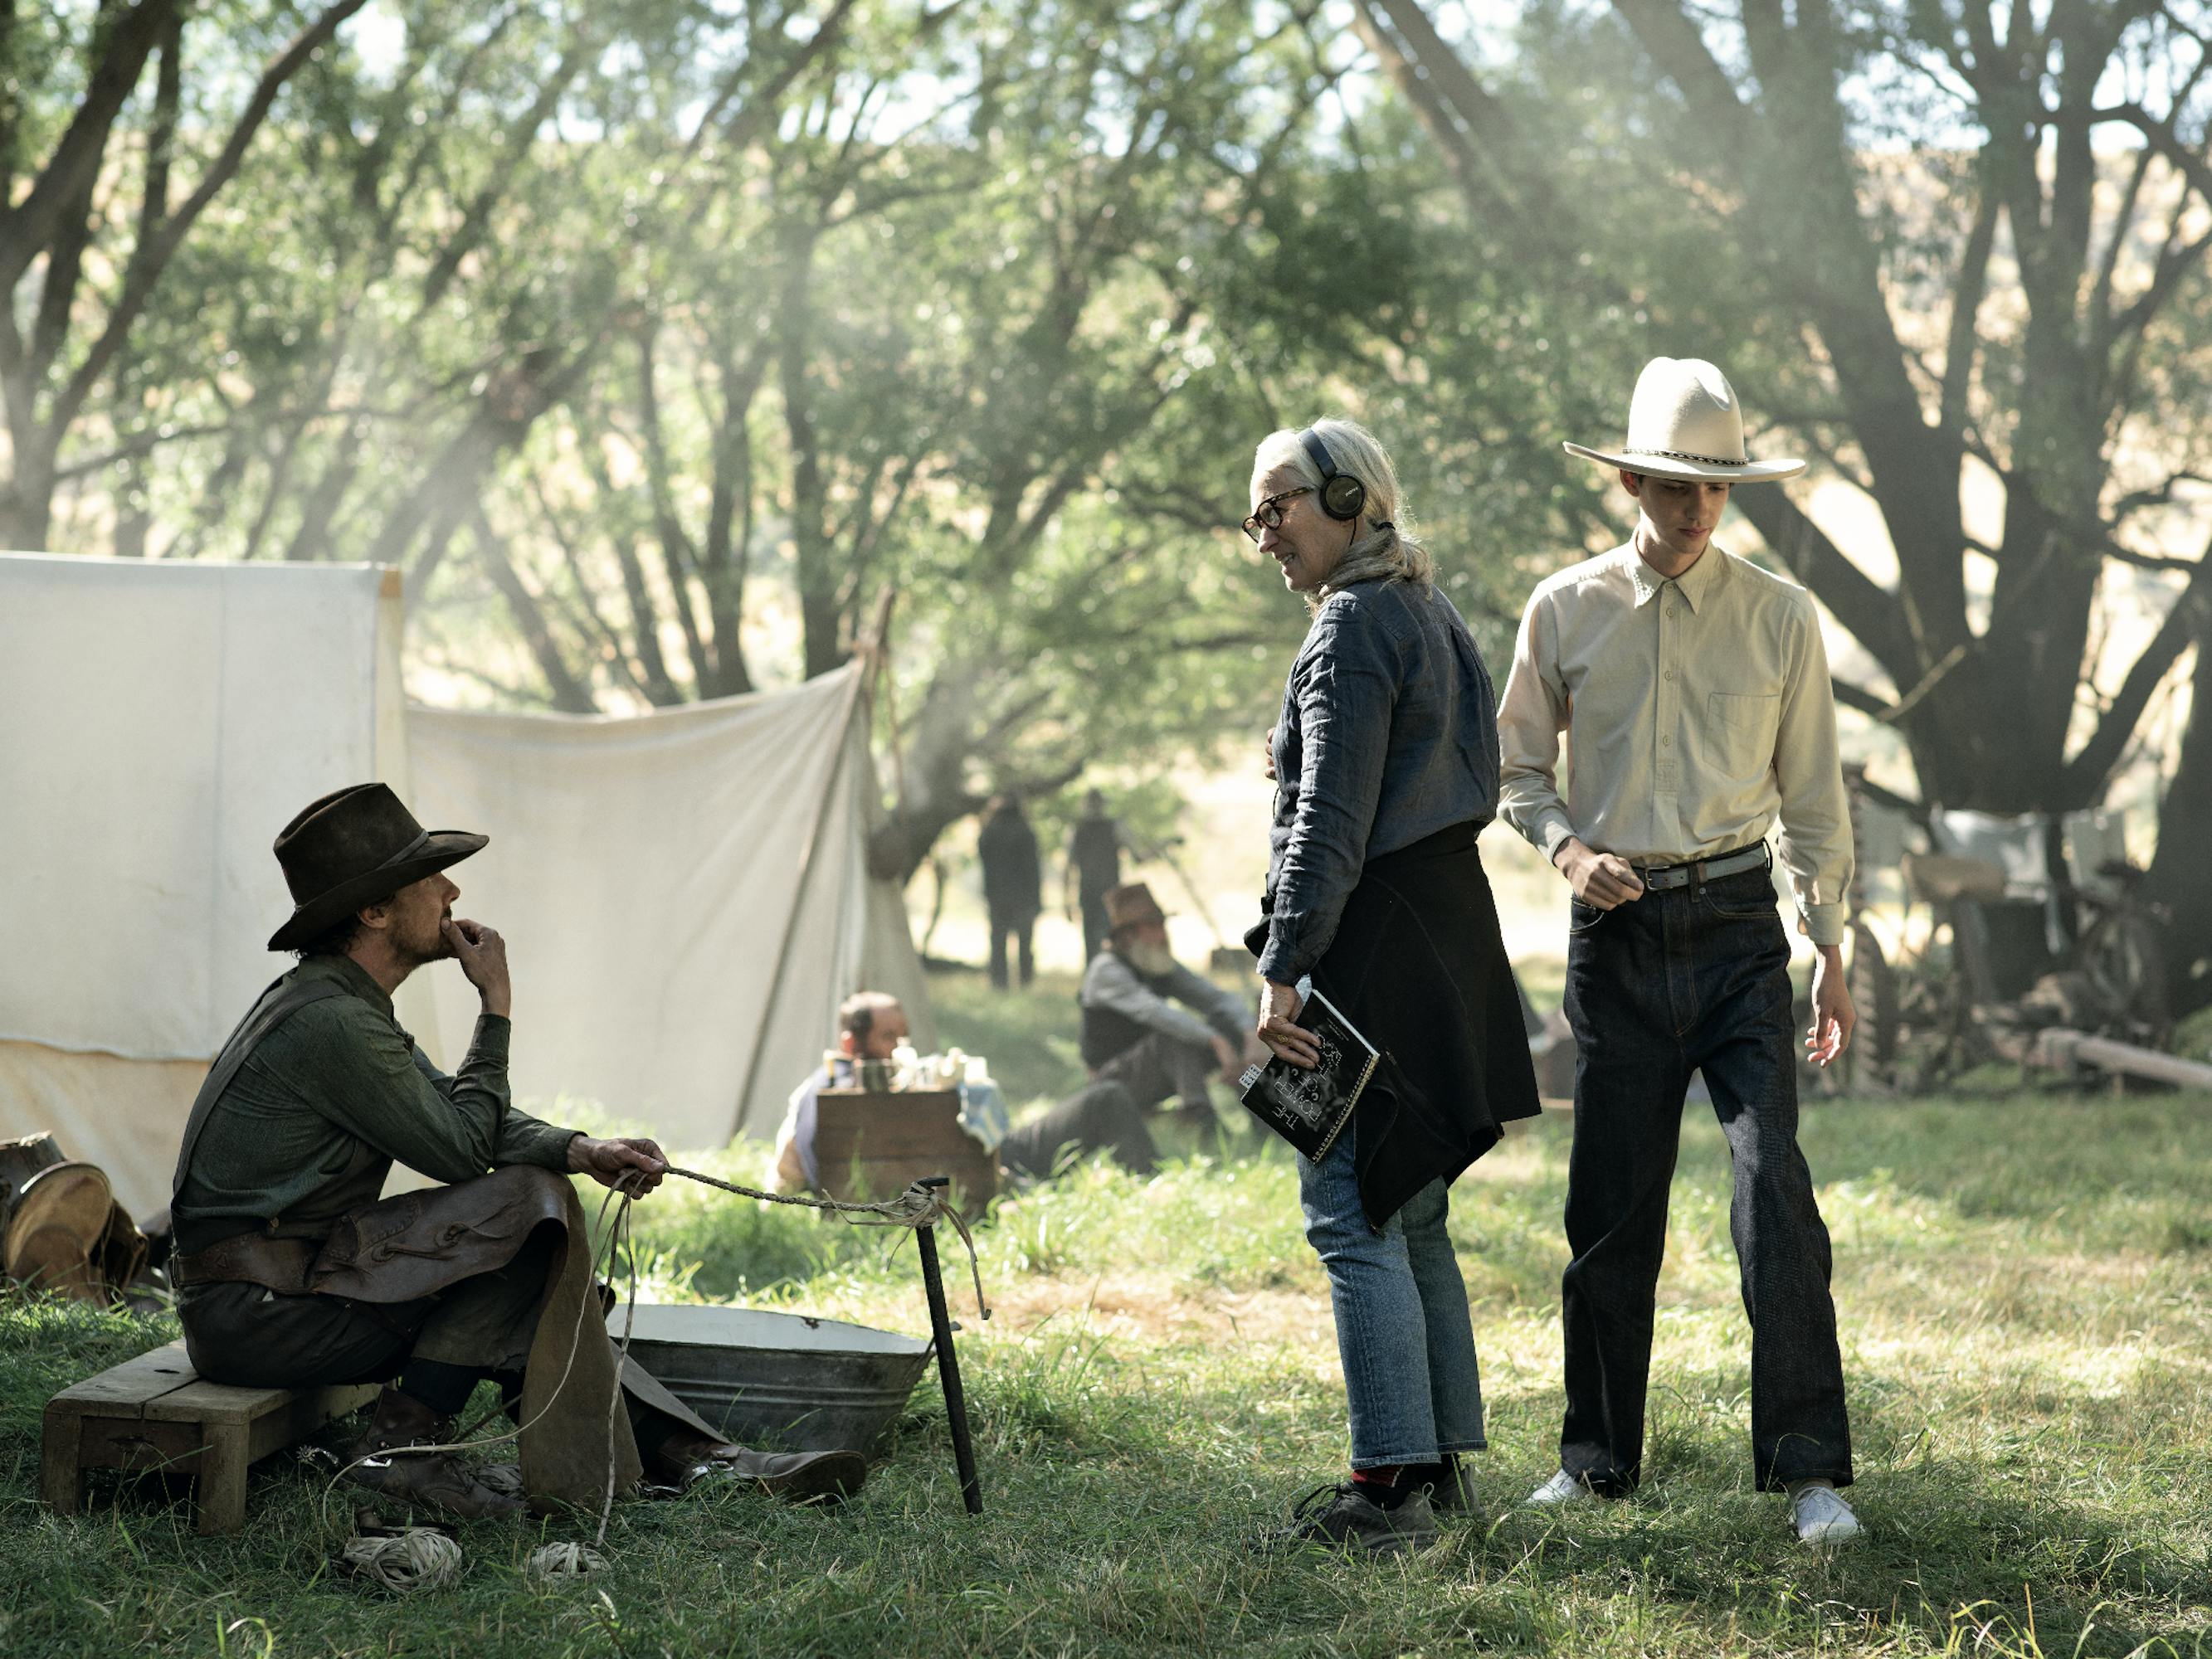 Benedict Cumberbatch, Jane Campion, and Kodi Smit-McPhee mingle outside in this green, sun-lit scene. Cumberbatch wears a wide-brimmed hat and dark clothing. Campion wears headphones, jeans, and a grey top. Smit-McPhee wears a white wide brimmed hat and dark pants.